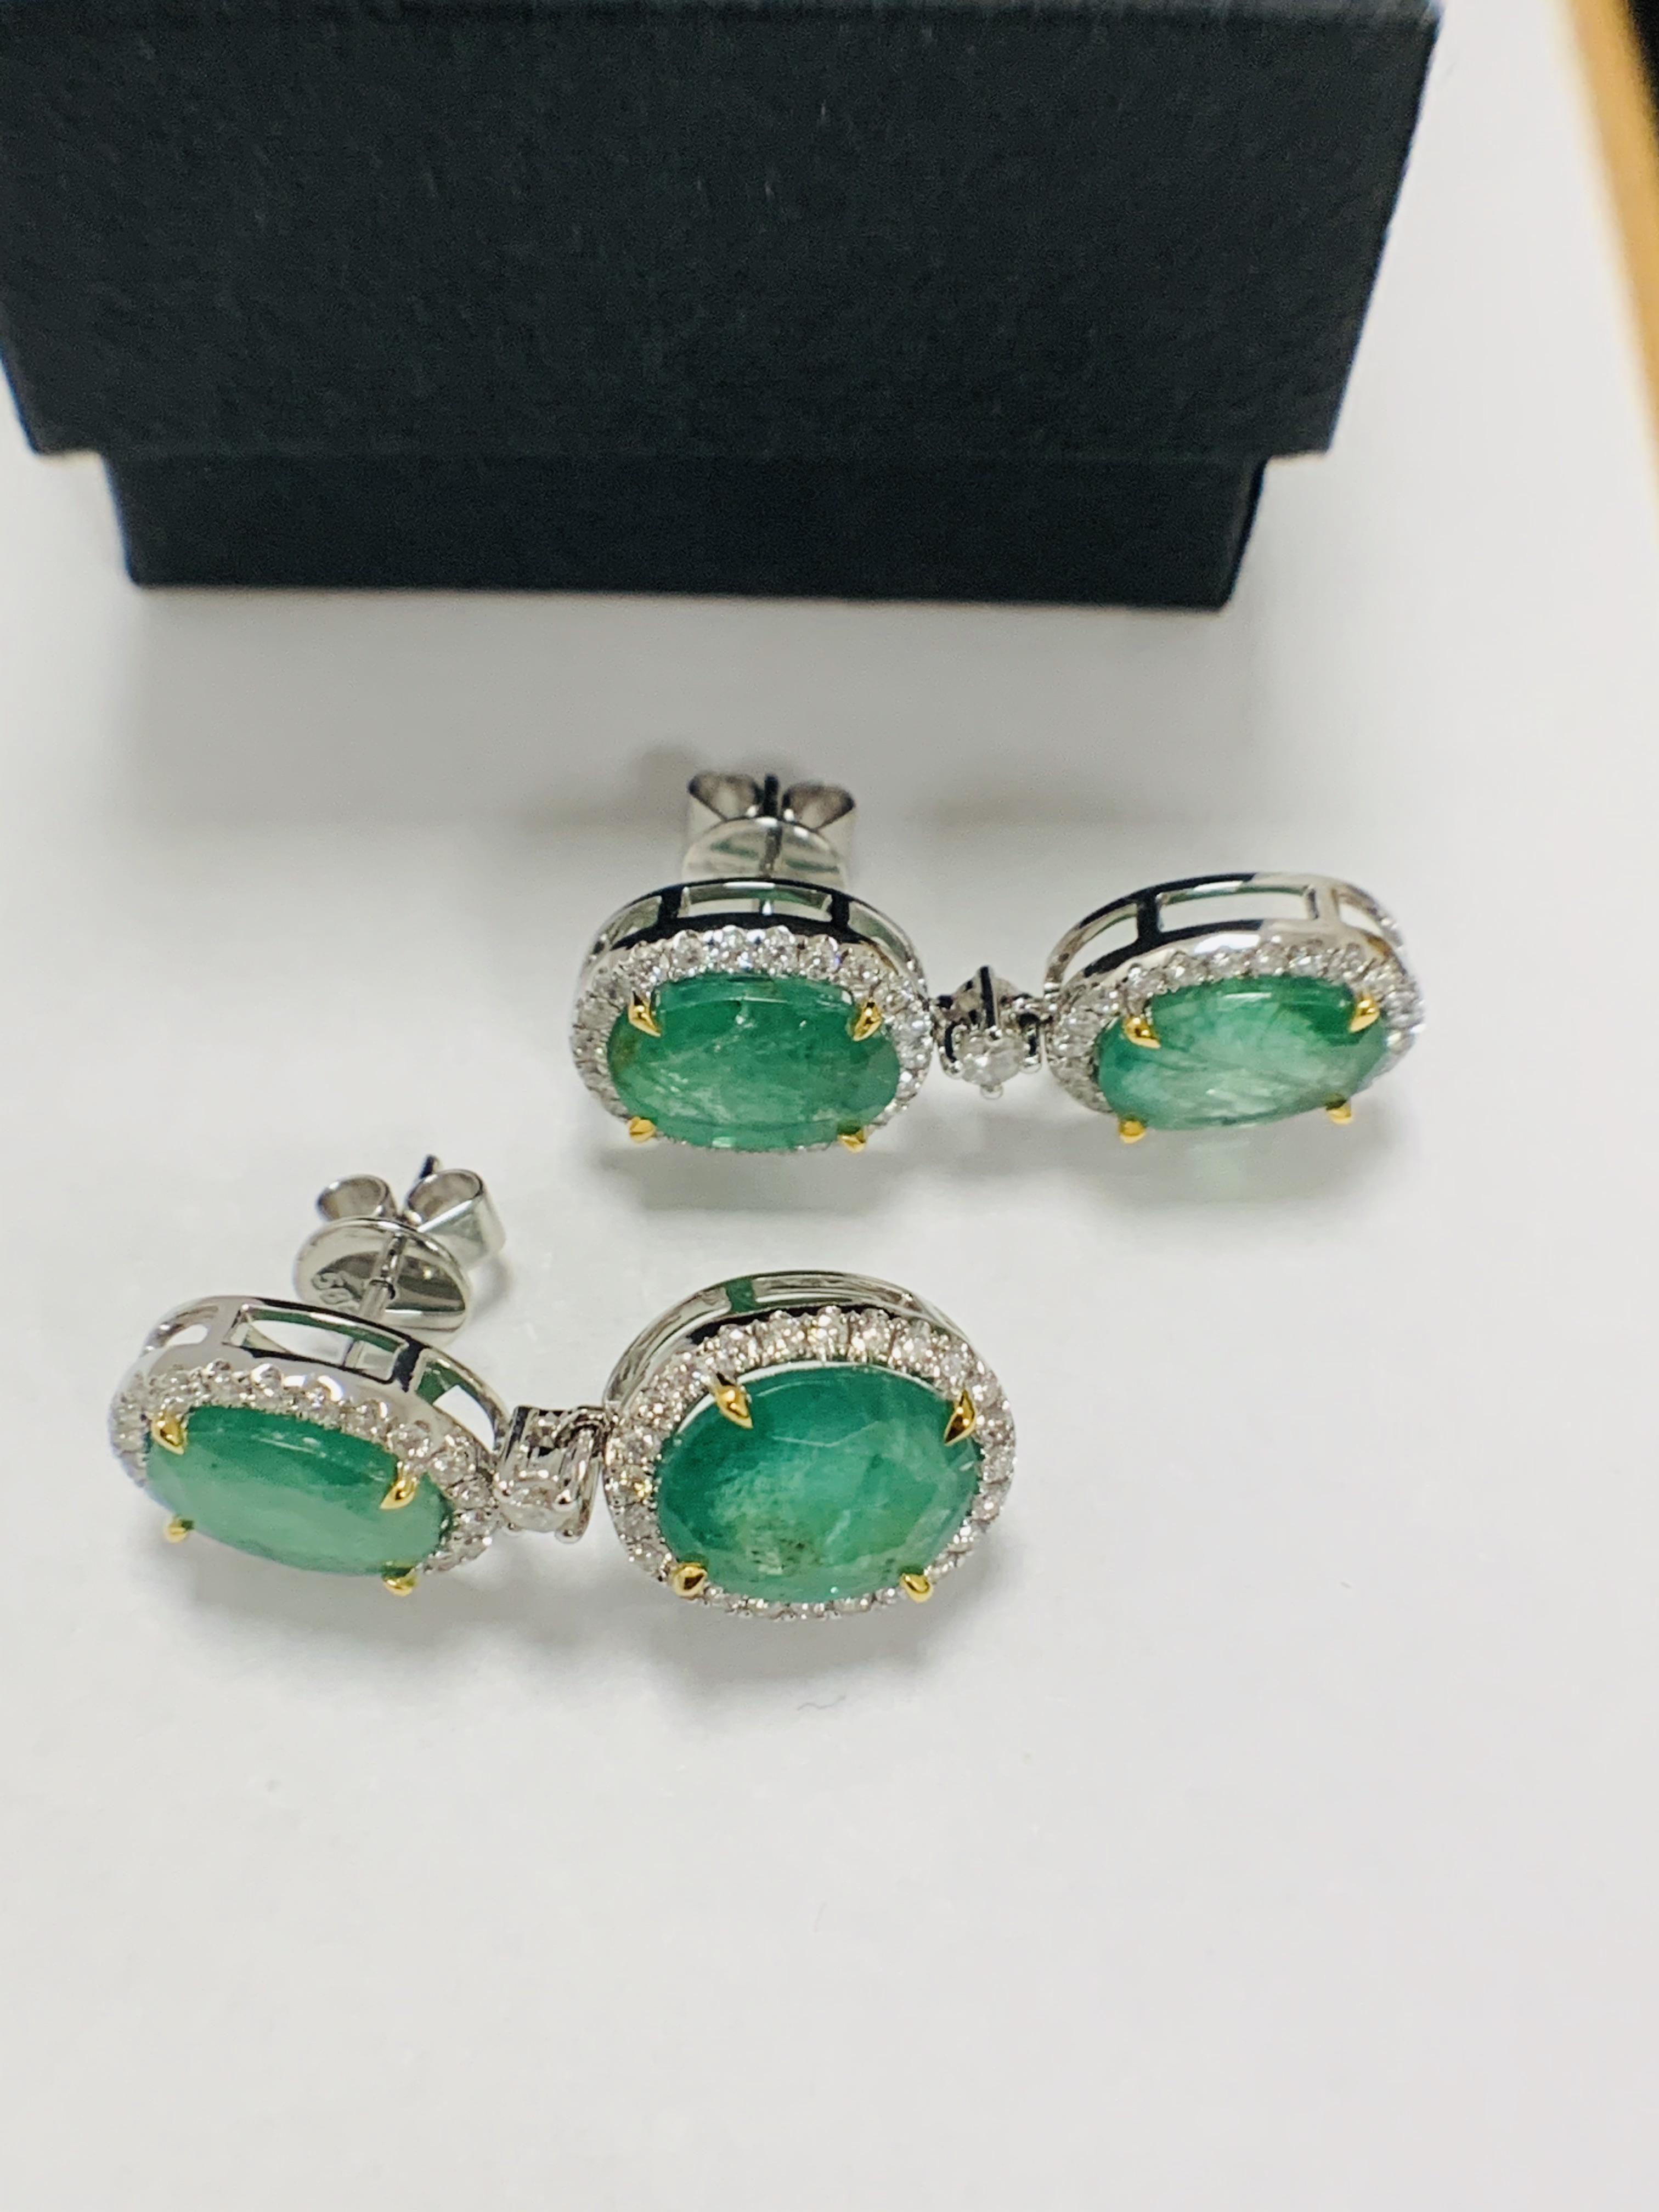 14ct White and Yellow Gold Emerald and Diamond drop earrings featuring, 4 oval cut, medium green Eme - Image 4 of 17